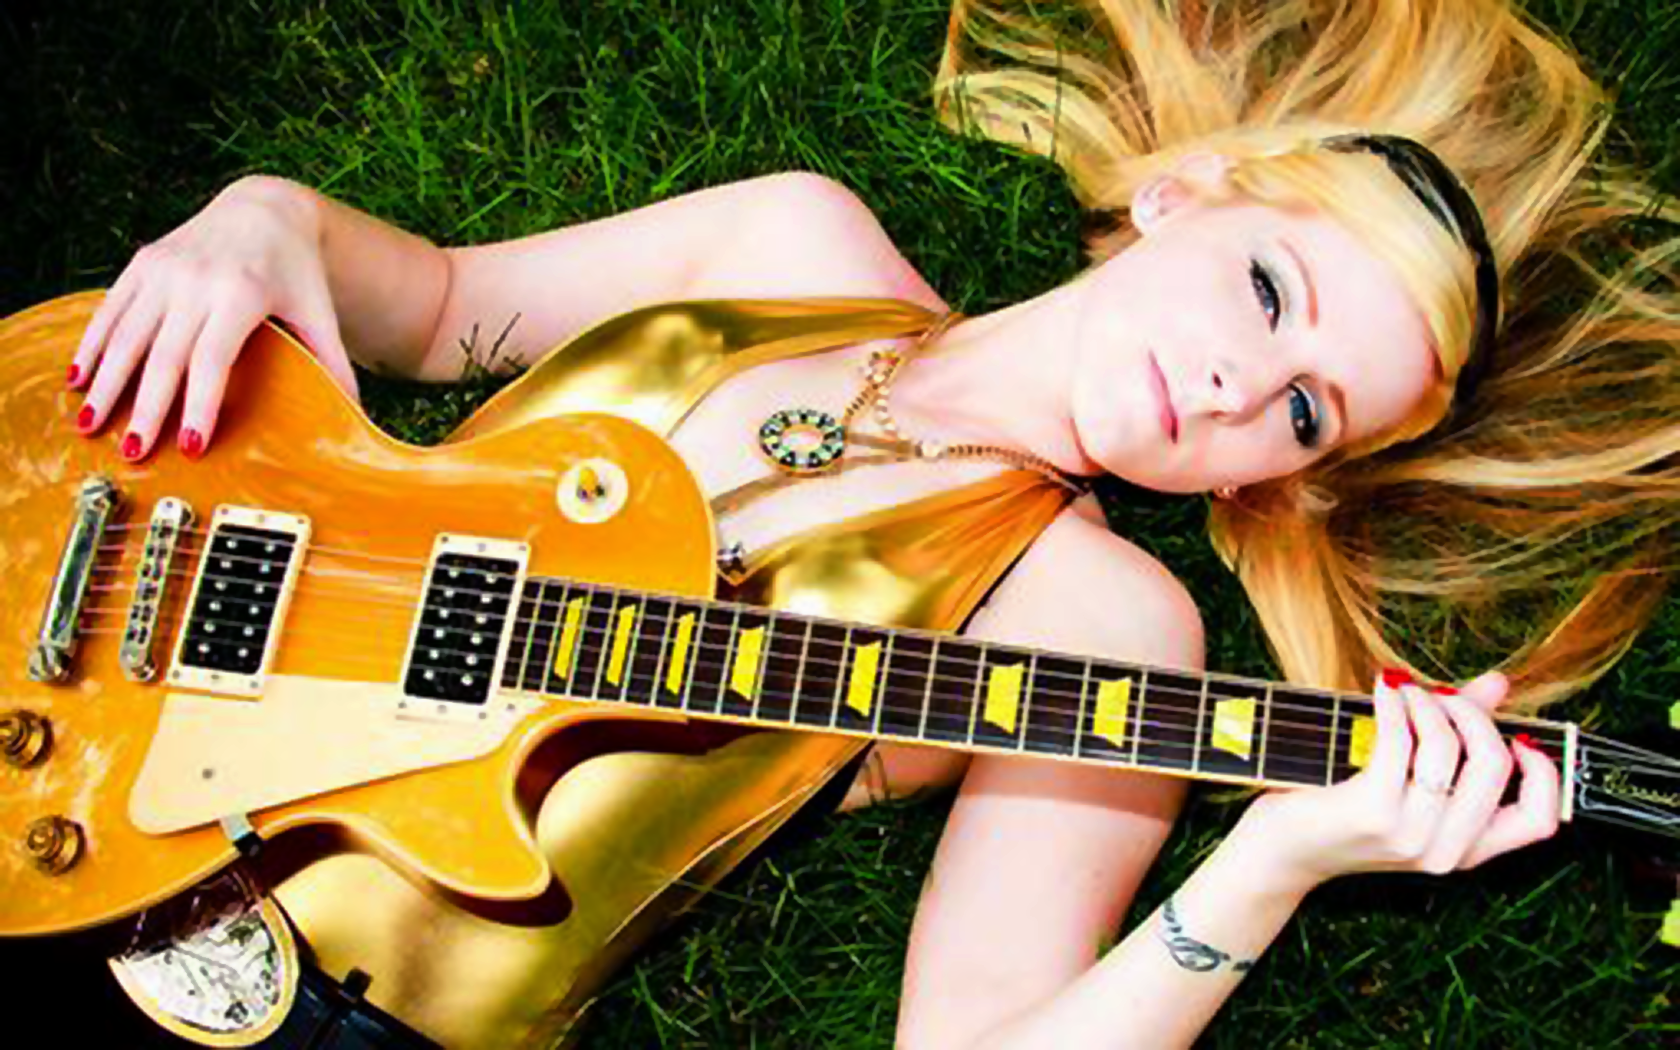 Banksy's Girlfriend, Alexis Smith laying on the grass with an electric guitar across her body and her blonde hair flowing outward.